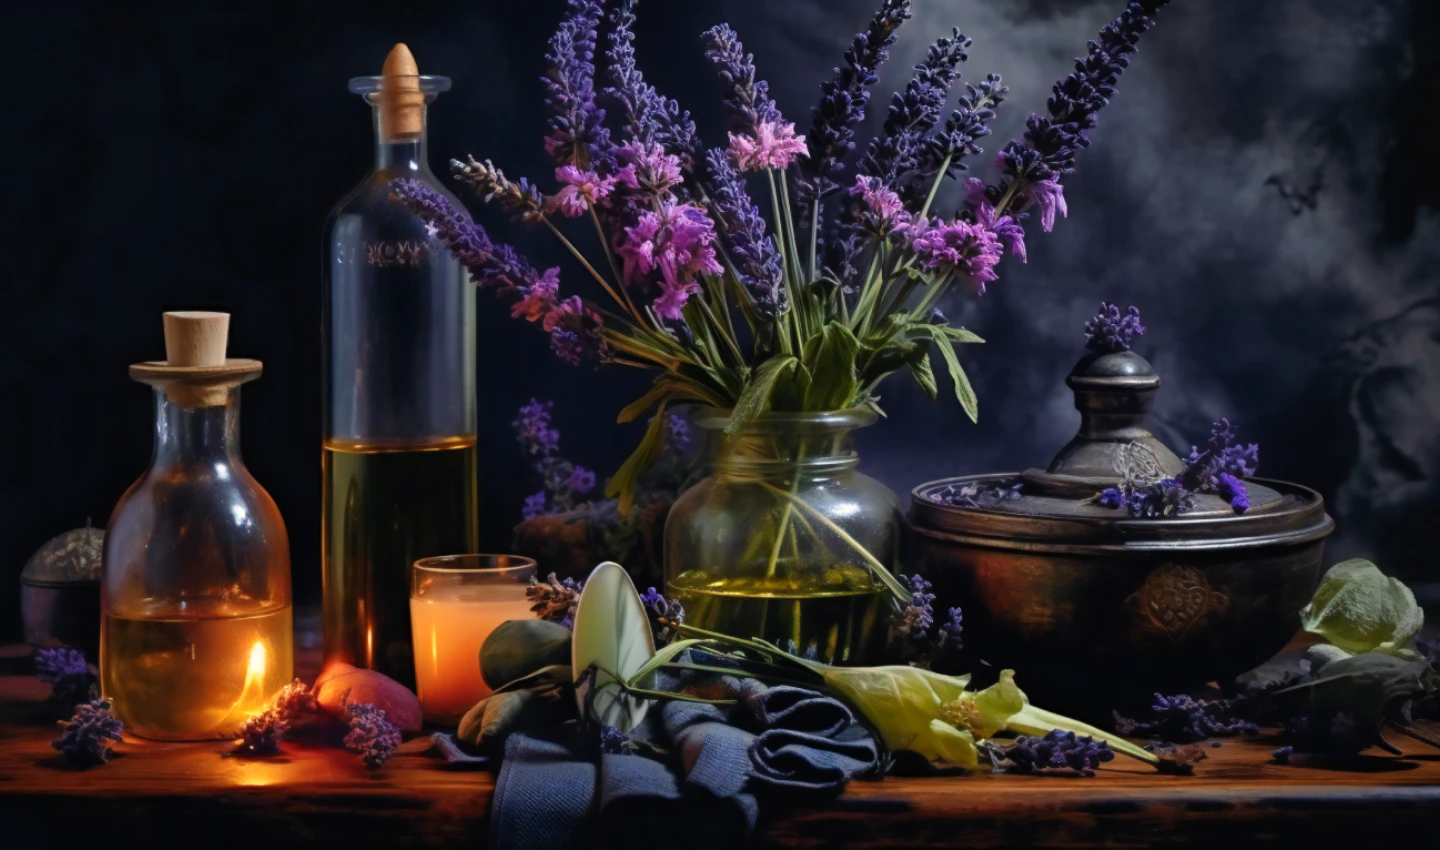 An evocative image of flowers and natural elements, illustrating the ancient origins of perfumery and the first scents that shaped the art.